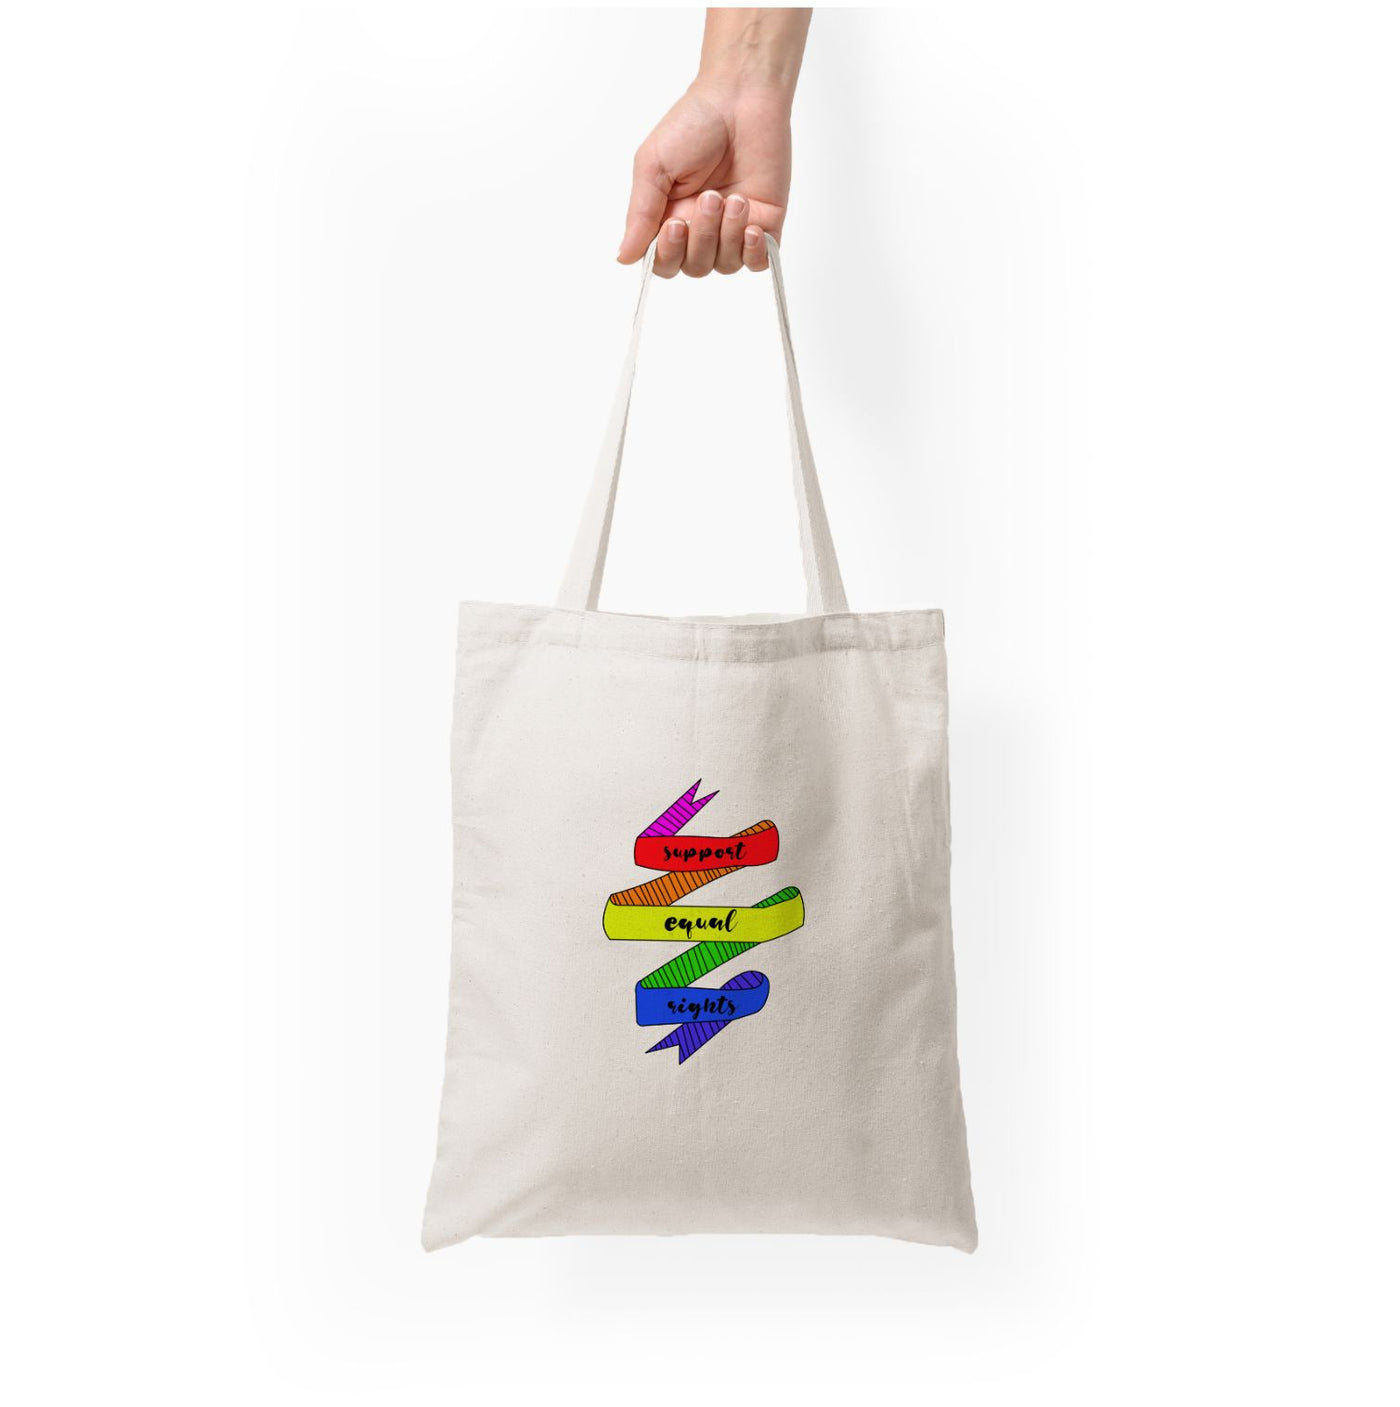 Support equal rights - Pride Tote Bag